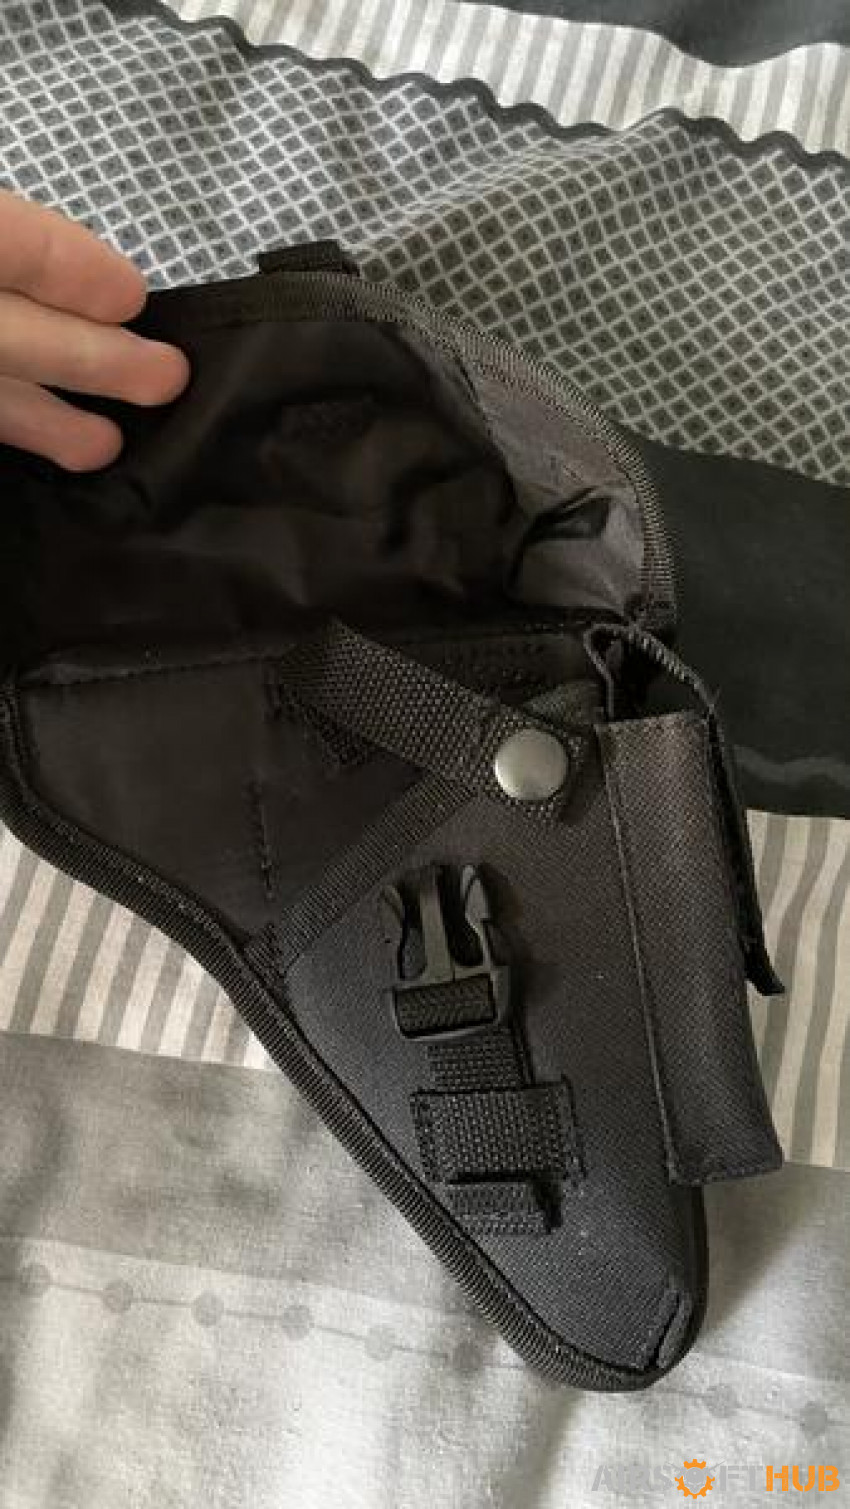 Russian Markov holster - Used airsoft equipment